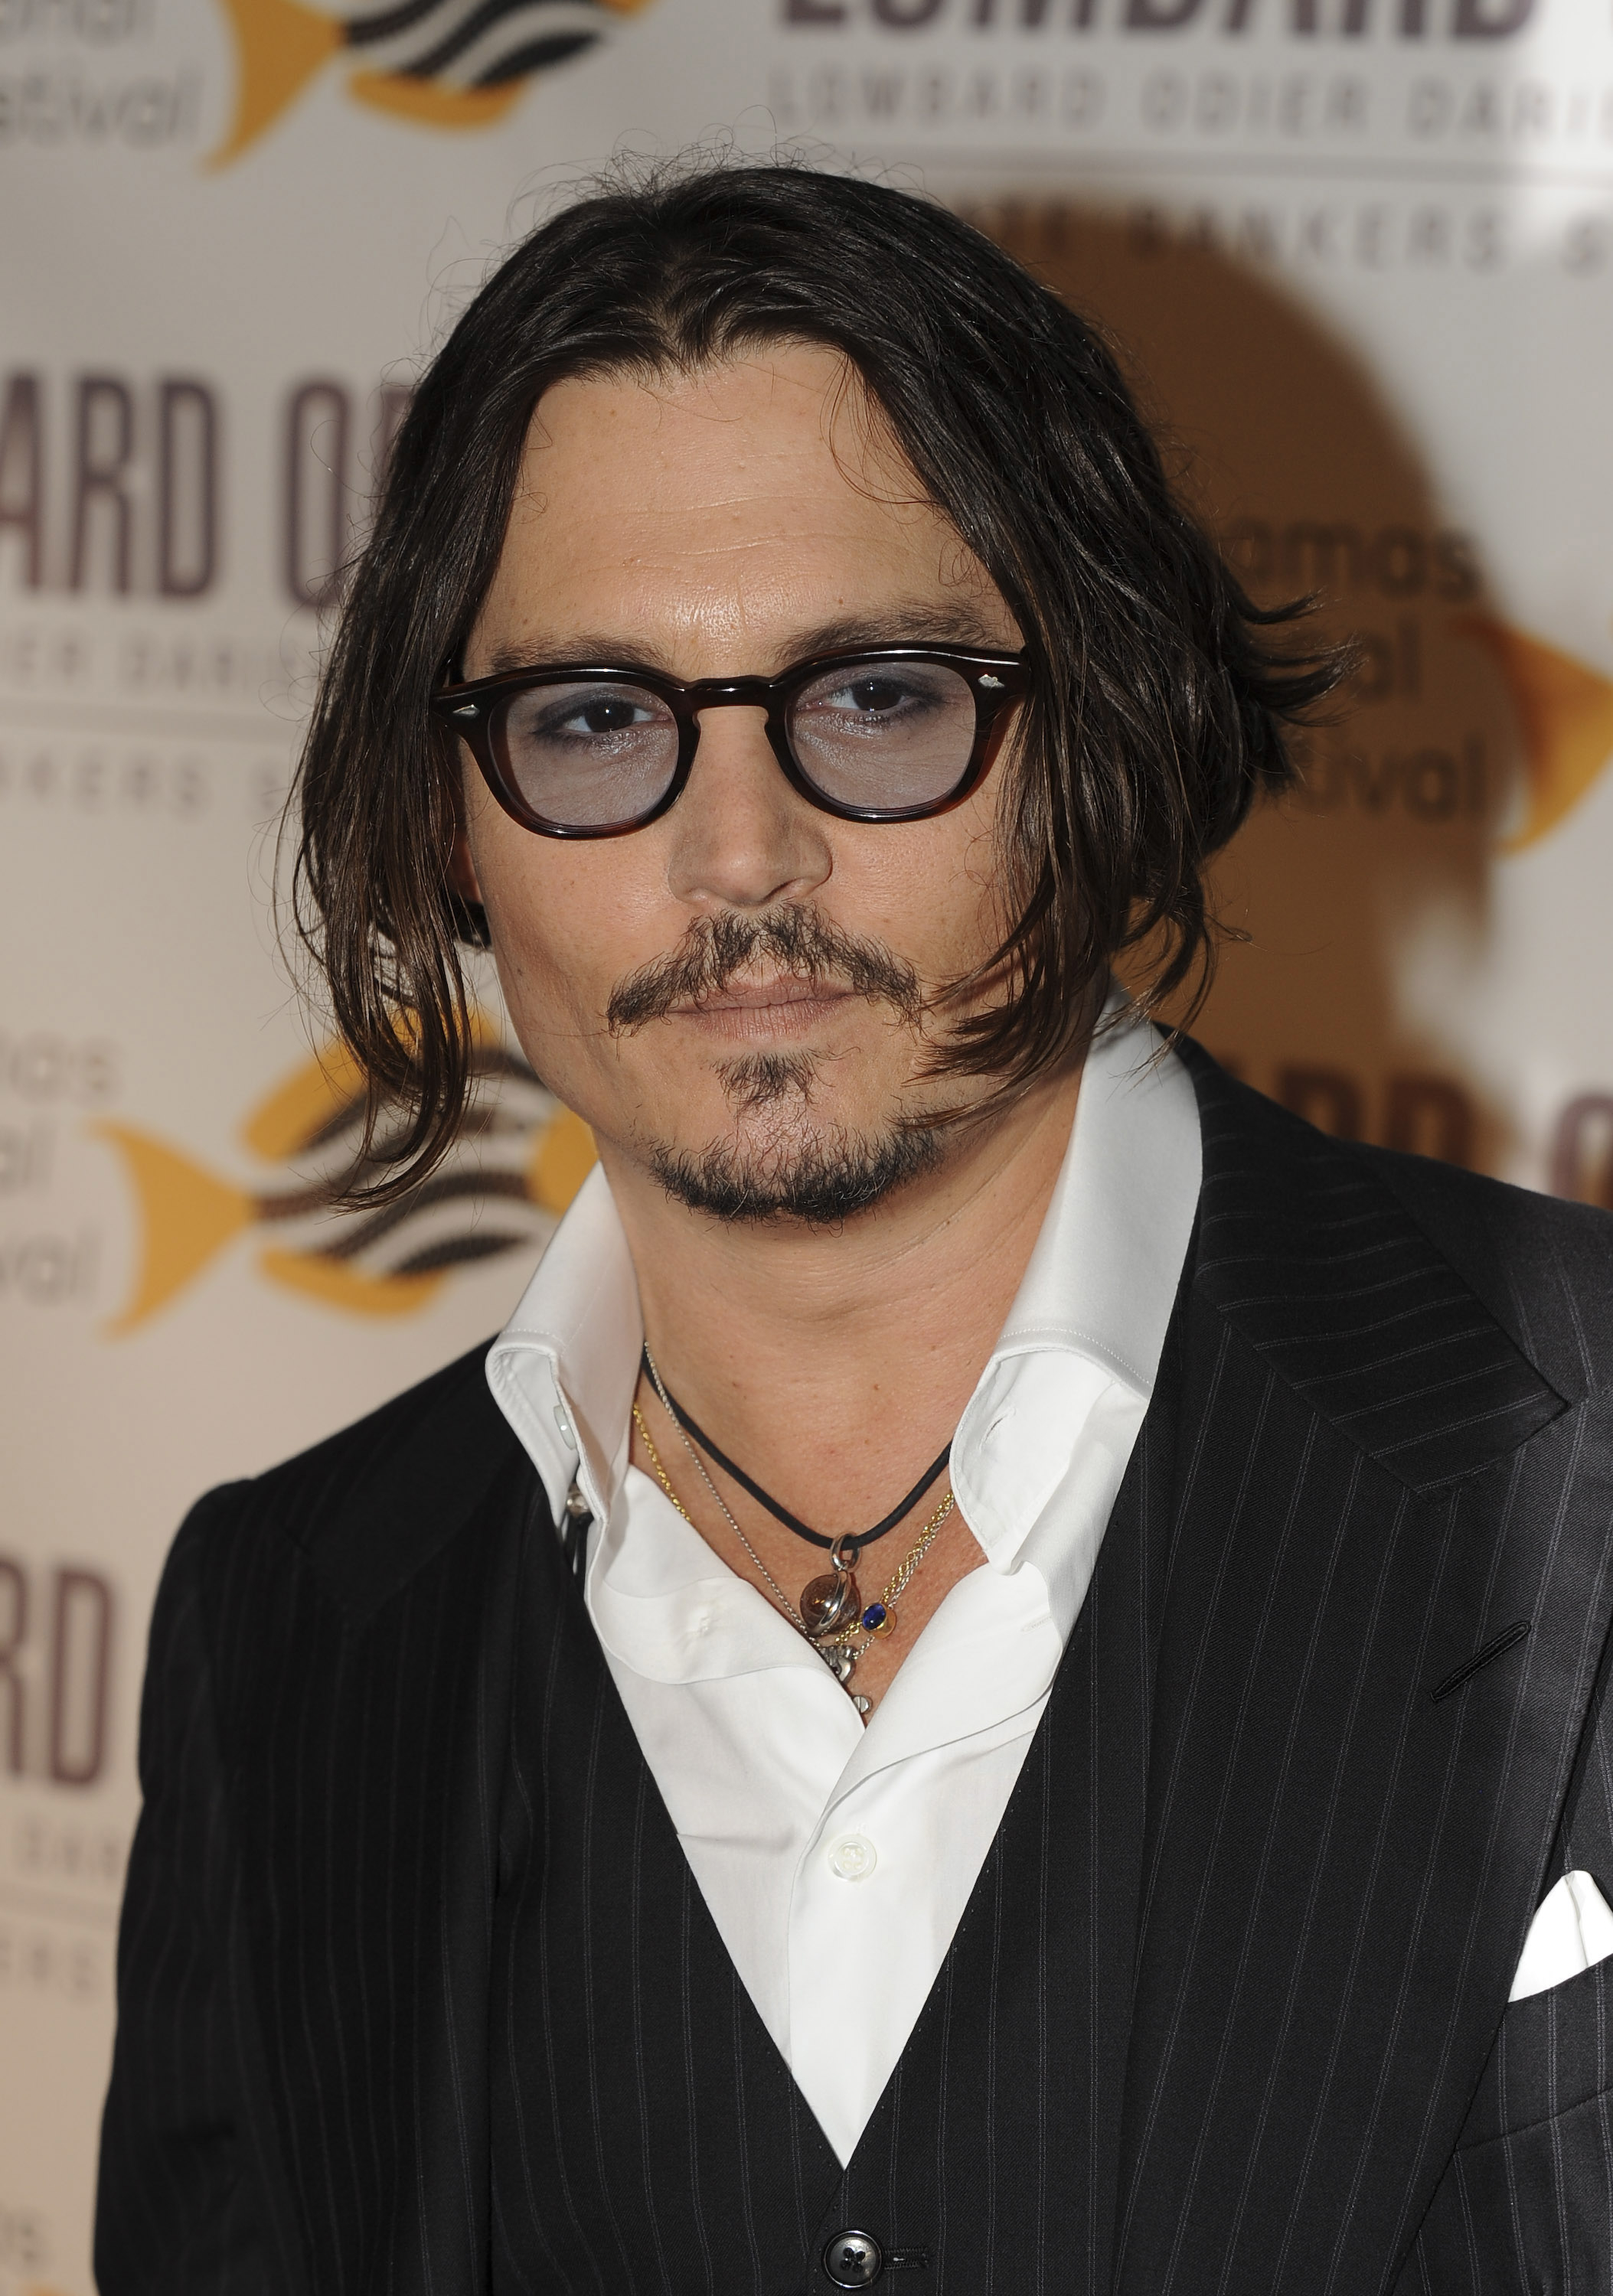 Close-up of Johnny in a suit at a media event